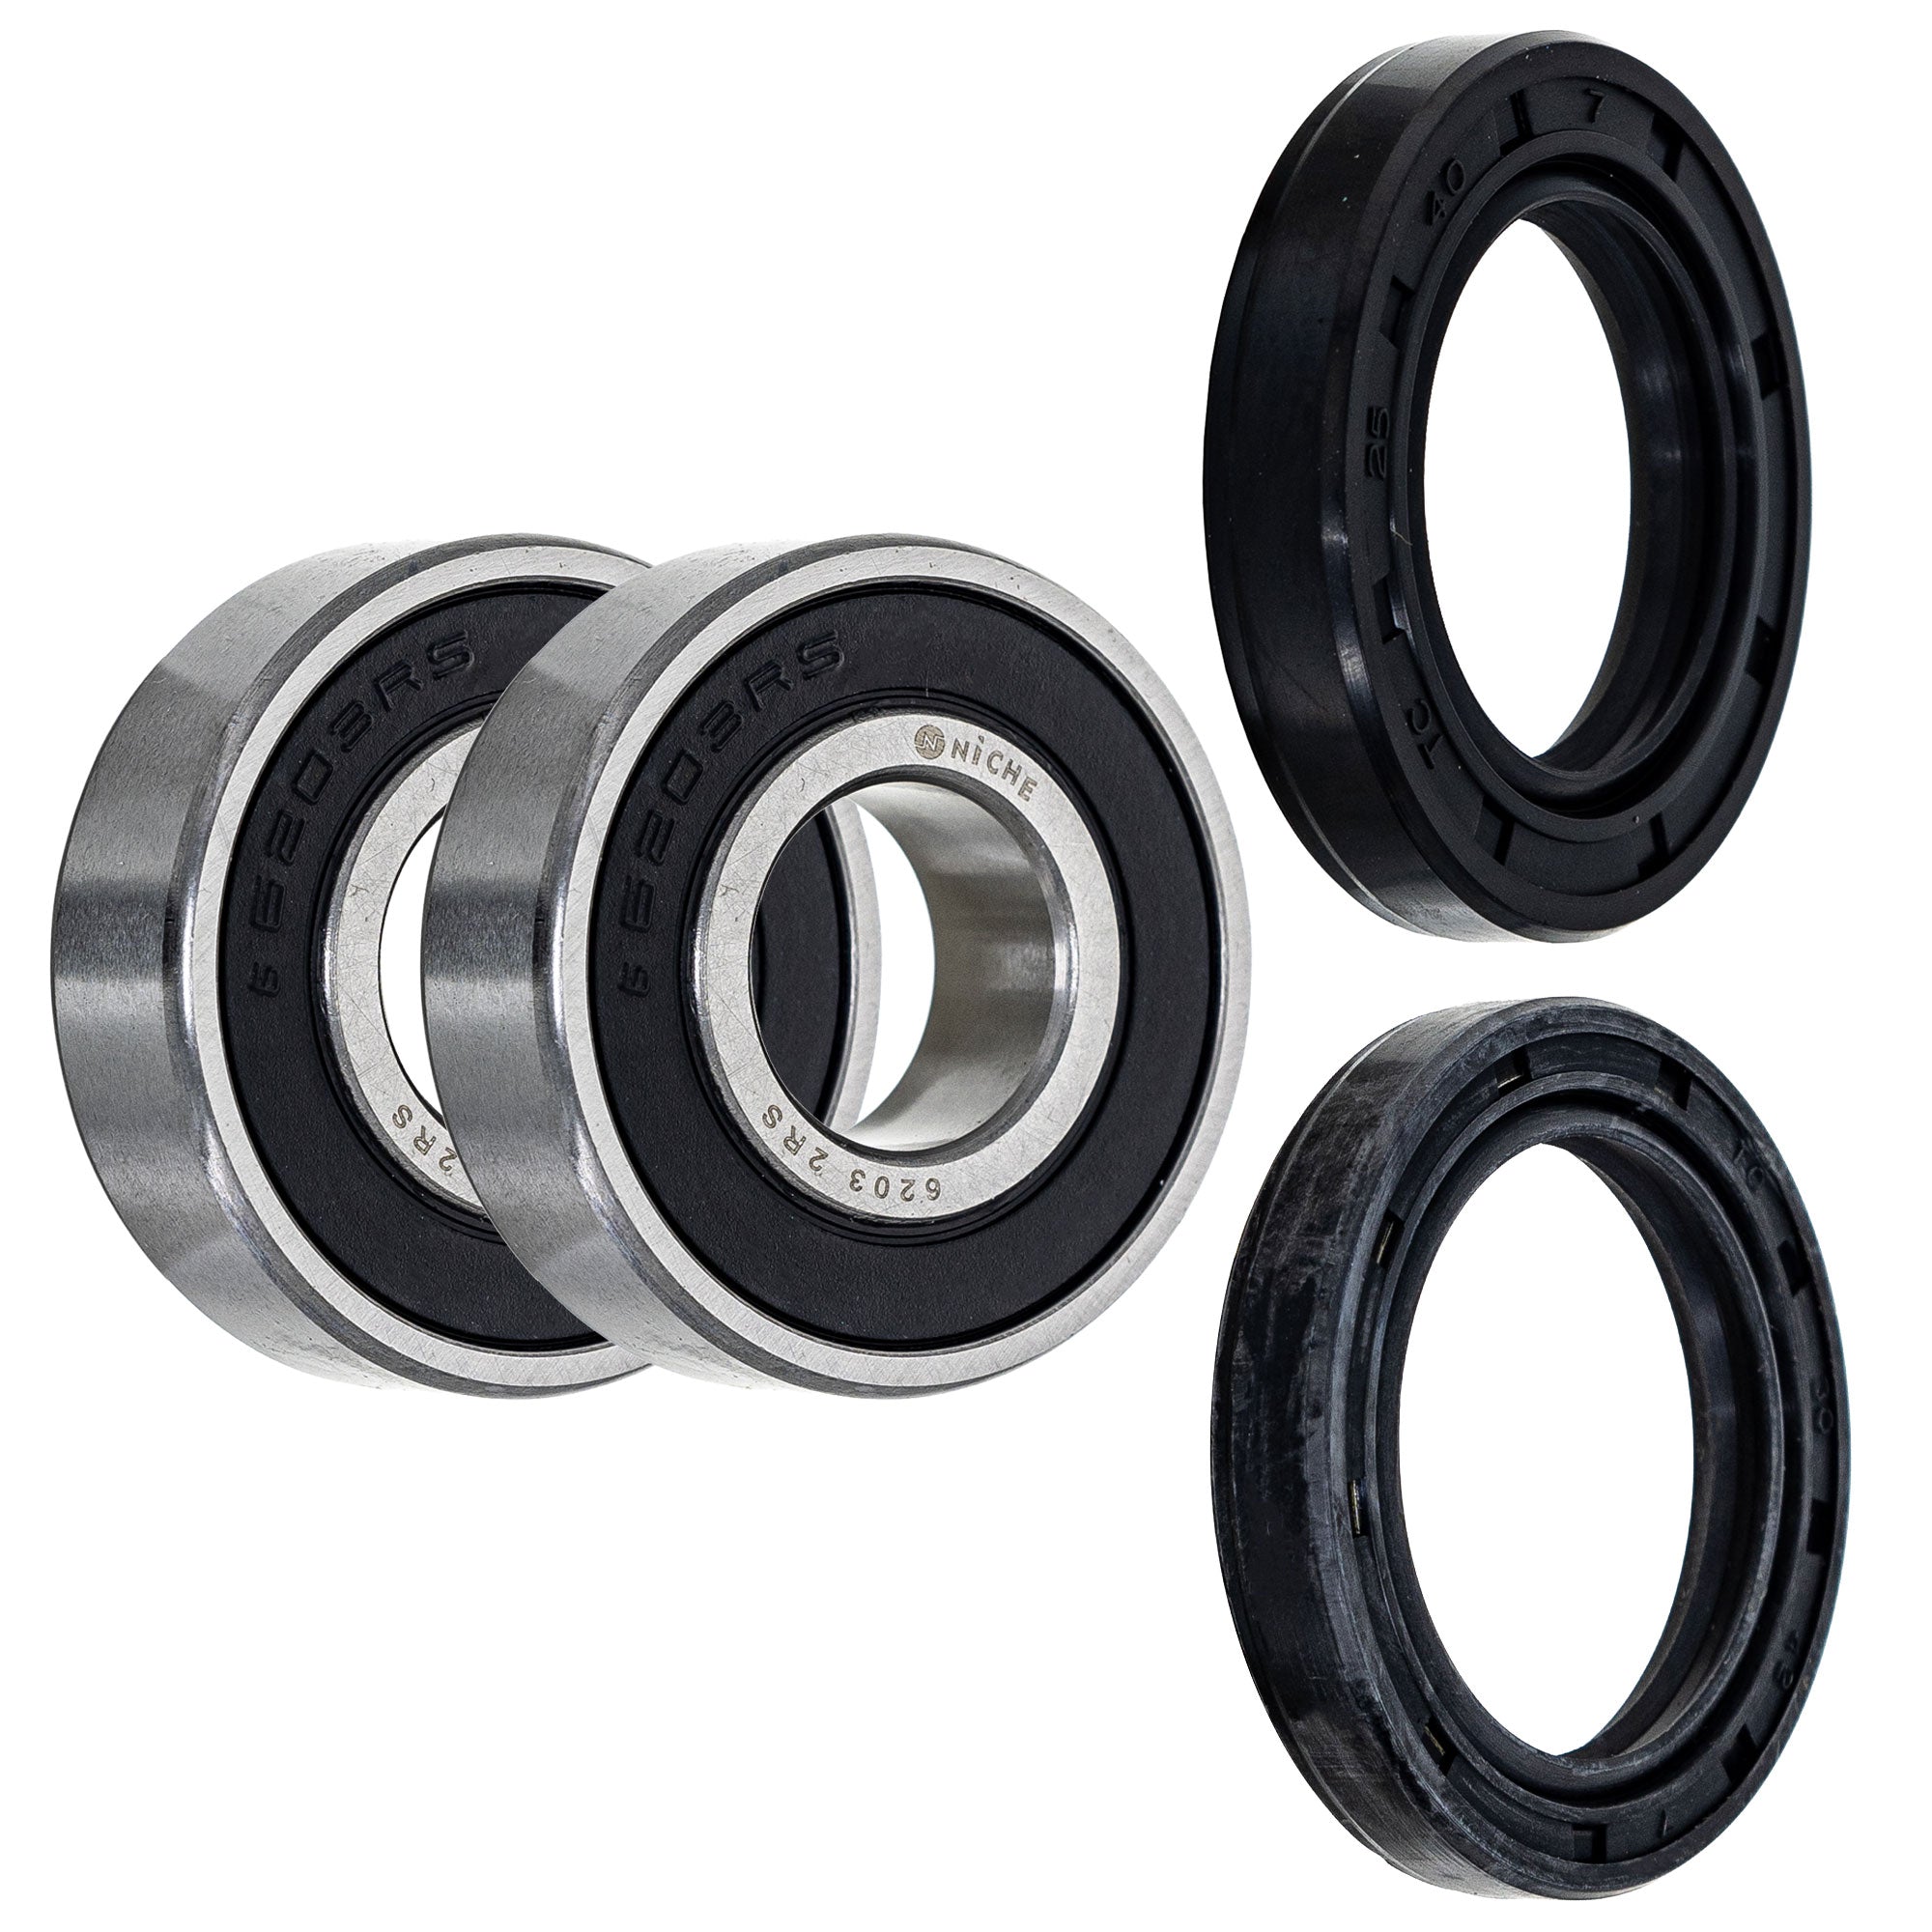 Wheel Bearing Seal Kit for zOTHER Ref No TW200 NICHE MK1008973